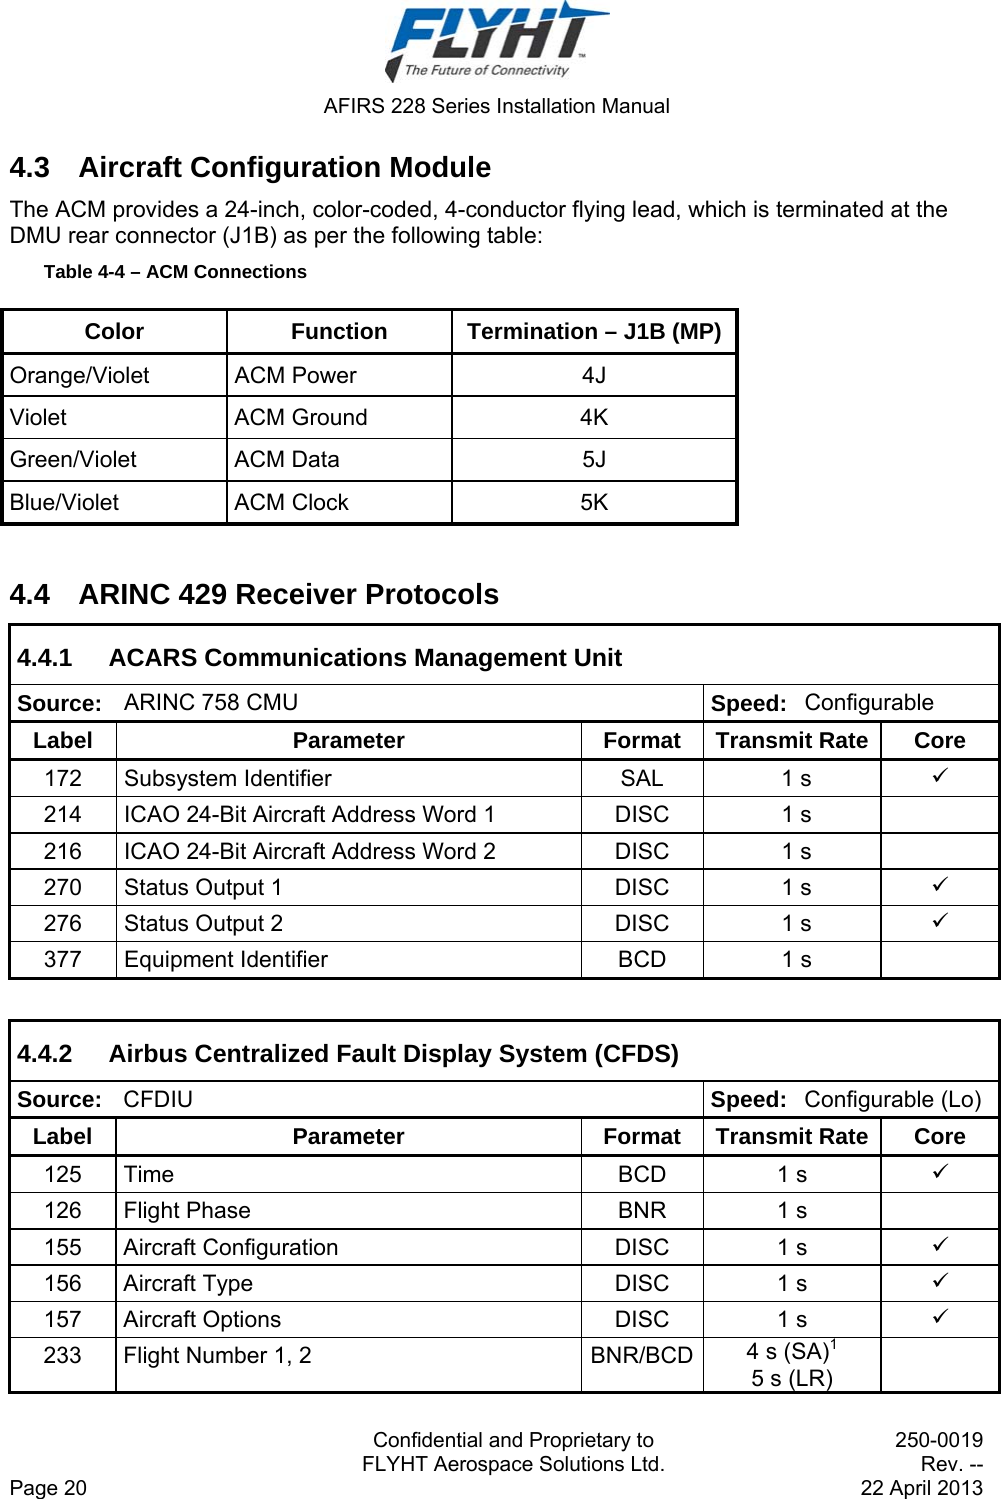  AFIRS 228 Series Installation Manual   Confidential and Proprietary to  250-0019   FLYHT Aerospace Solutions Ltd.  Rev. -- Page 20    22 April 2013 4.3 Aircraft Configuration Module The ACM provides a 24-inch, color-coded, 4-conductor flying lead, which is terminated at the DMU rear connector (J1B) as per the following table: Table 4-4 – ACM Connections Color  Function  Termination – J1B (MP) Orange/Violet ACM Power  4J Violet ACM Ground  4K Green/Violet ACM Data  5J Blue/Violet ACM Clock  5K  4.4  ARINC 429 Receiver Protocols 4.4.1  ACARS Communications Management Unit Source:  ARINC 758 CMU  Speed: Configurable Label Parameter Format Transmit Rate Core 172  Subsystem Identifier  SAL  1 s   214  ICAO 24-Bit Aircraft Address Word 1  DISC  1 s   216  ICAO 24-Bit Aircraft Address Word 2  DISC  1 s   270  Status Output 1  DISC  1 s   276  Status Output 2  DISC  1 s   377  Equipment Identifier  BCD  1 s    4.4.2  Airbus Centralized Fault Display System (CFDS) Source:  CFDIU  Speed: Configurable (Lo) Label Parameter Format Transmit Rate Core 125 Time  BCD  1 s   126  Flight Phase  BNR  1 s   155  Aircraft Configuration  DISC  1 s   156  Aircraft Type  DISC  1 s   157  Aircraft Options  DISC  1 s   233  Flight Number 1, 2  BNR/BCD 4 s (SA)1 5 s (LR)  